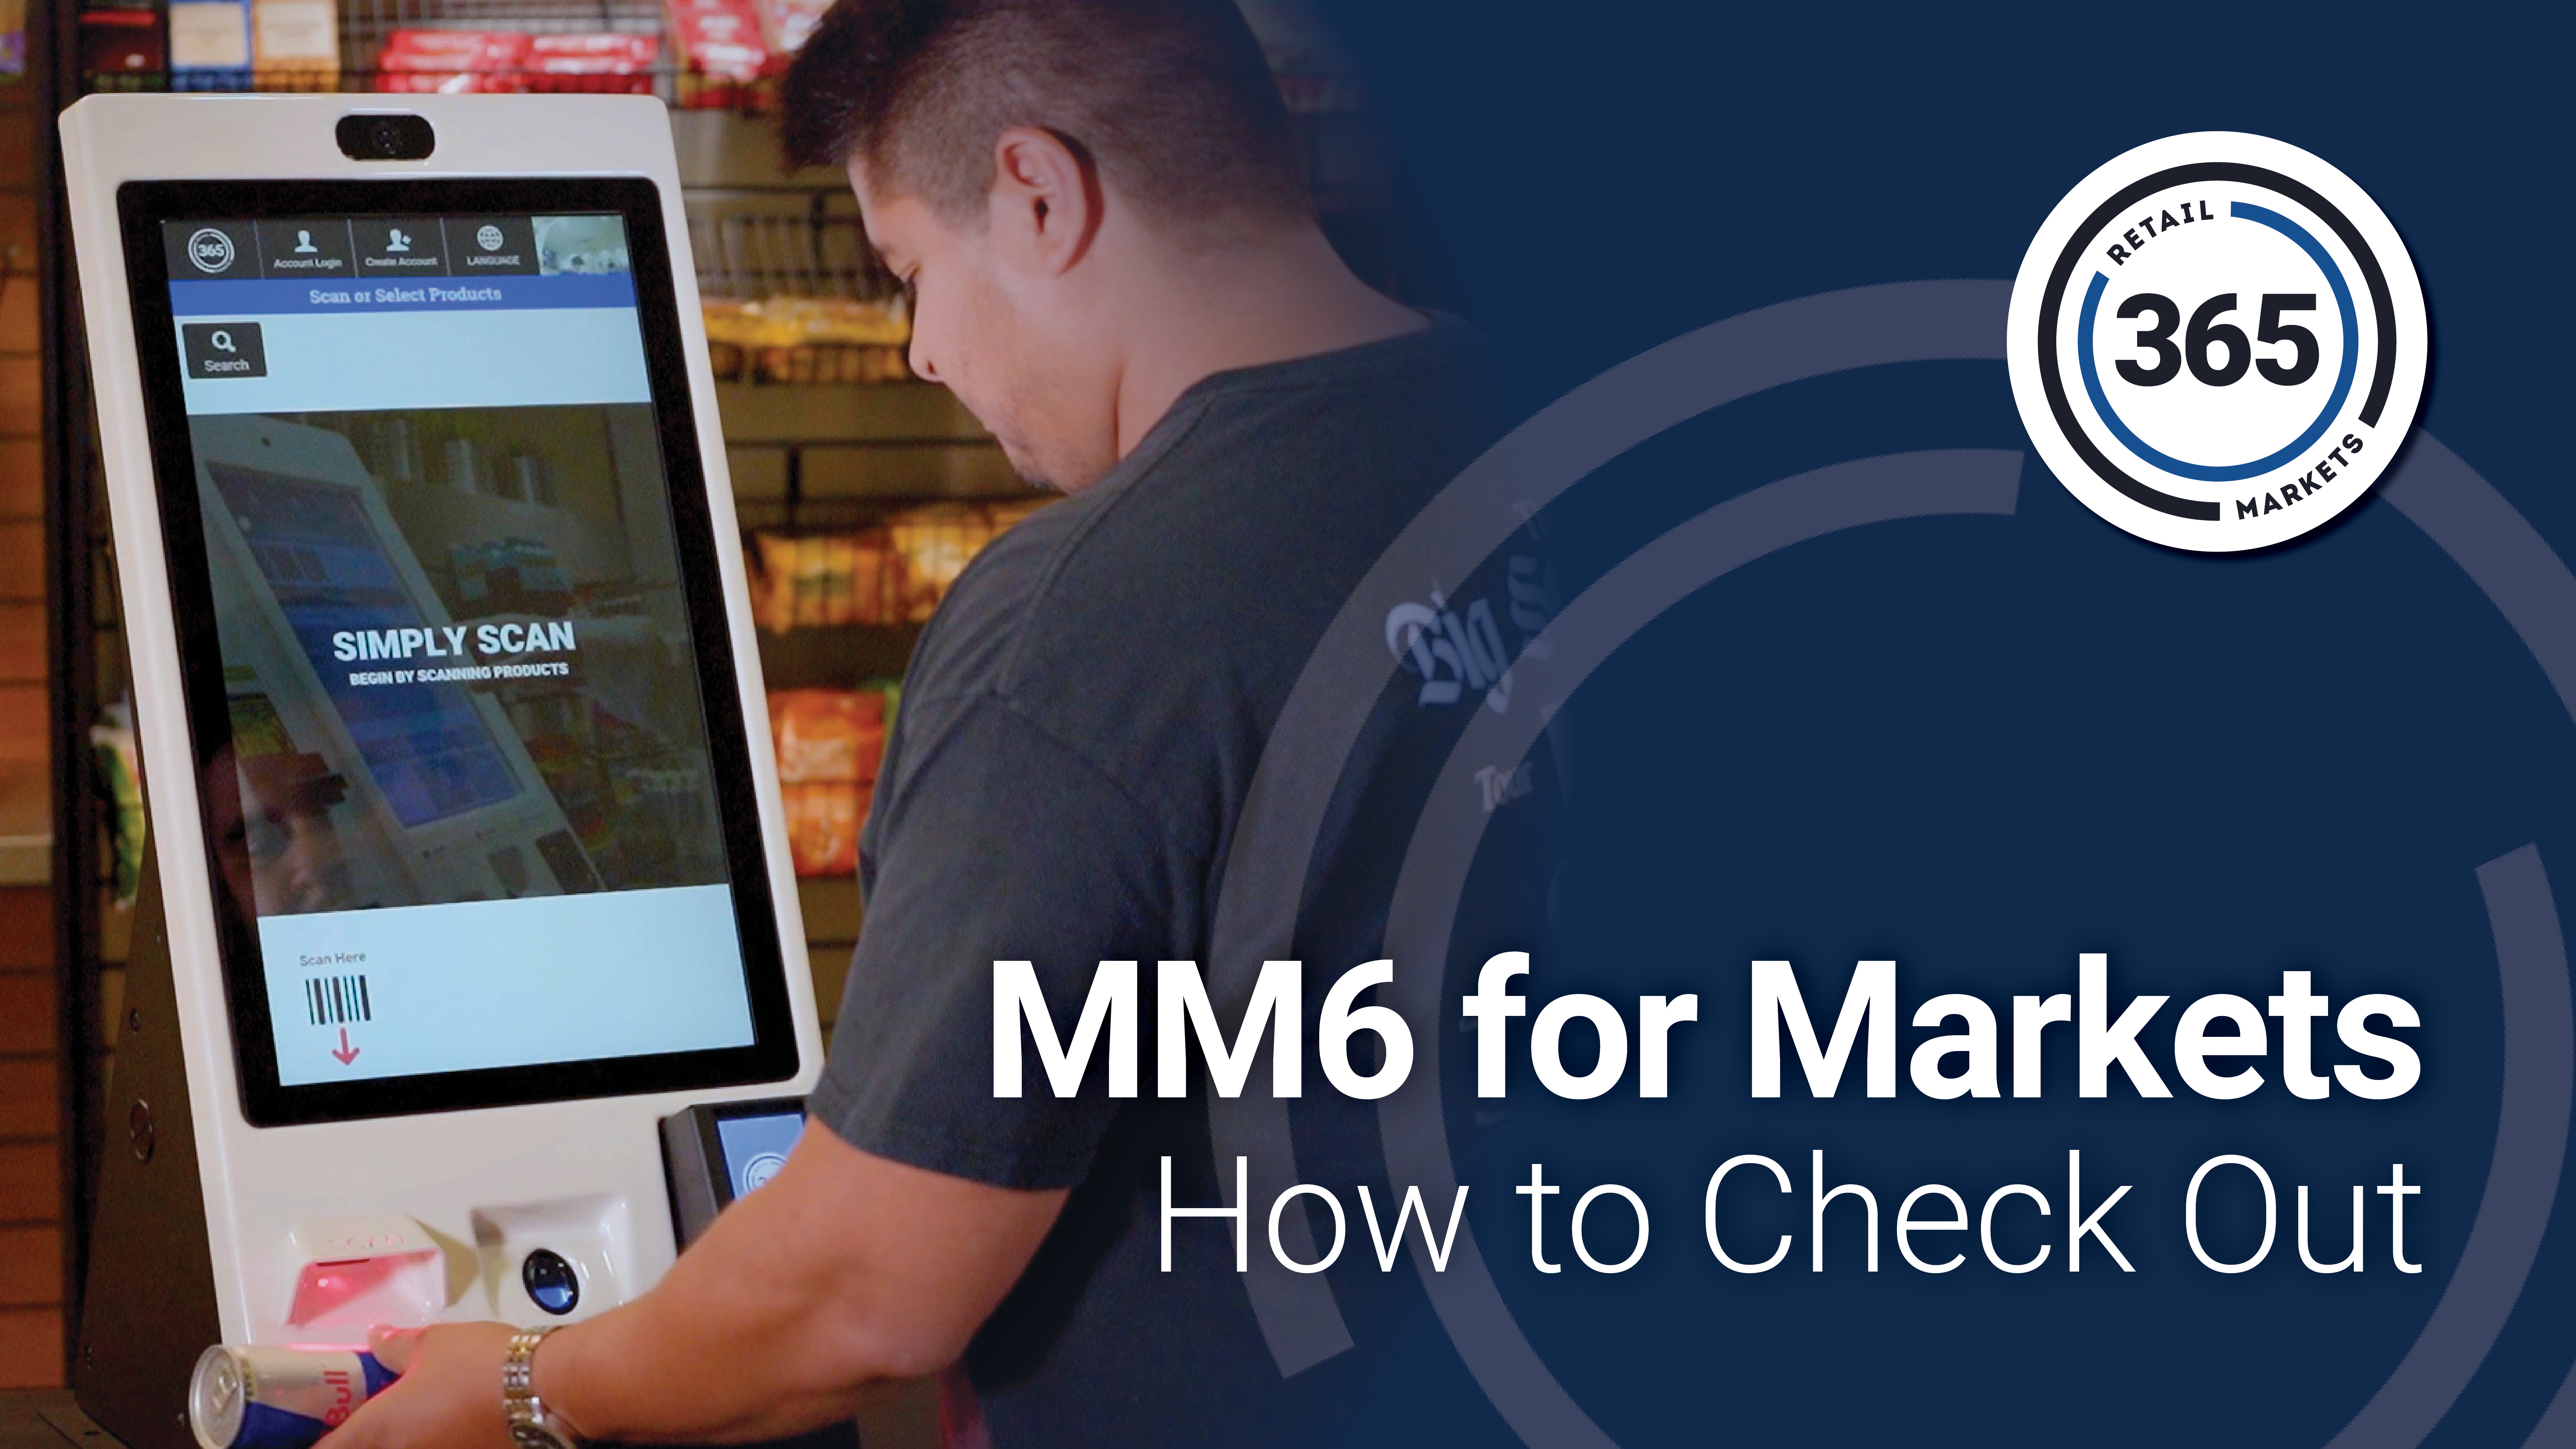 How to Checkout with the MM6 Kiosk